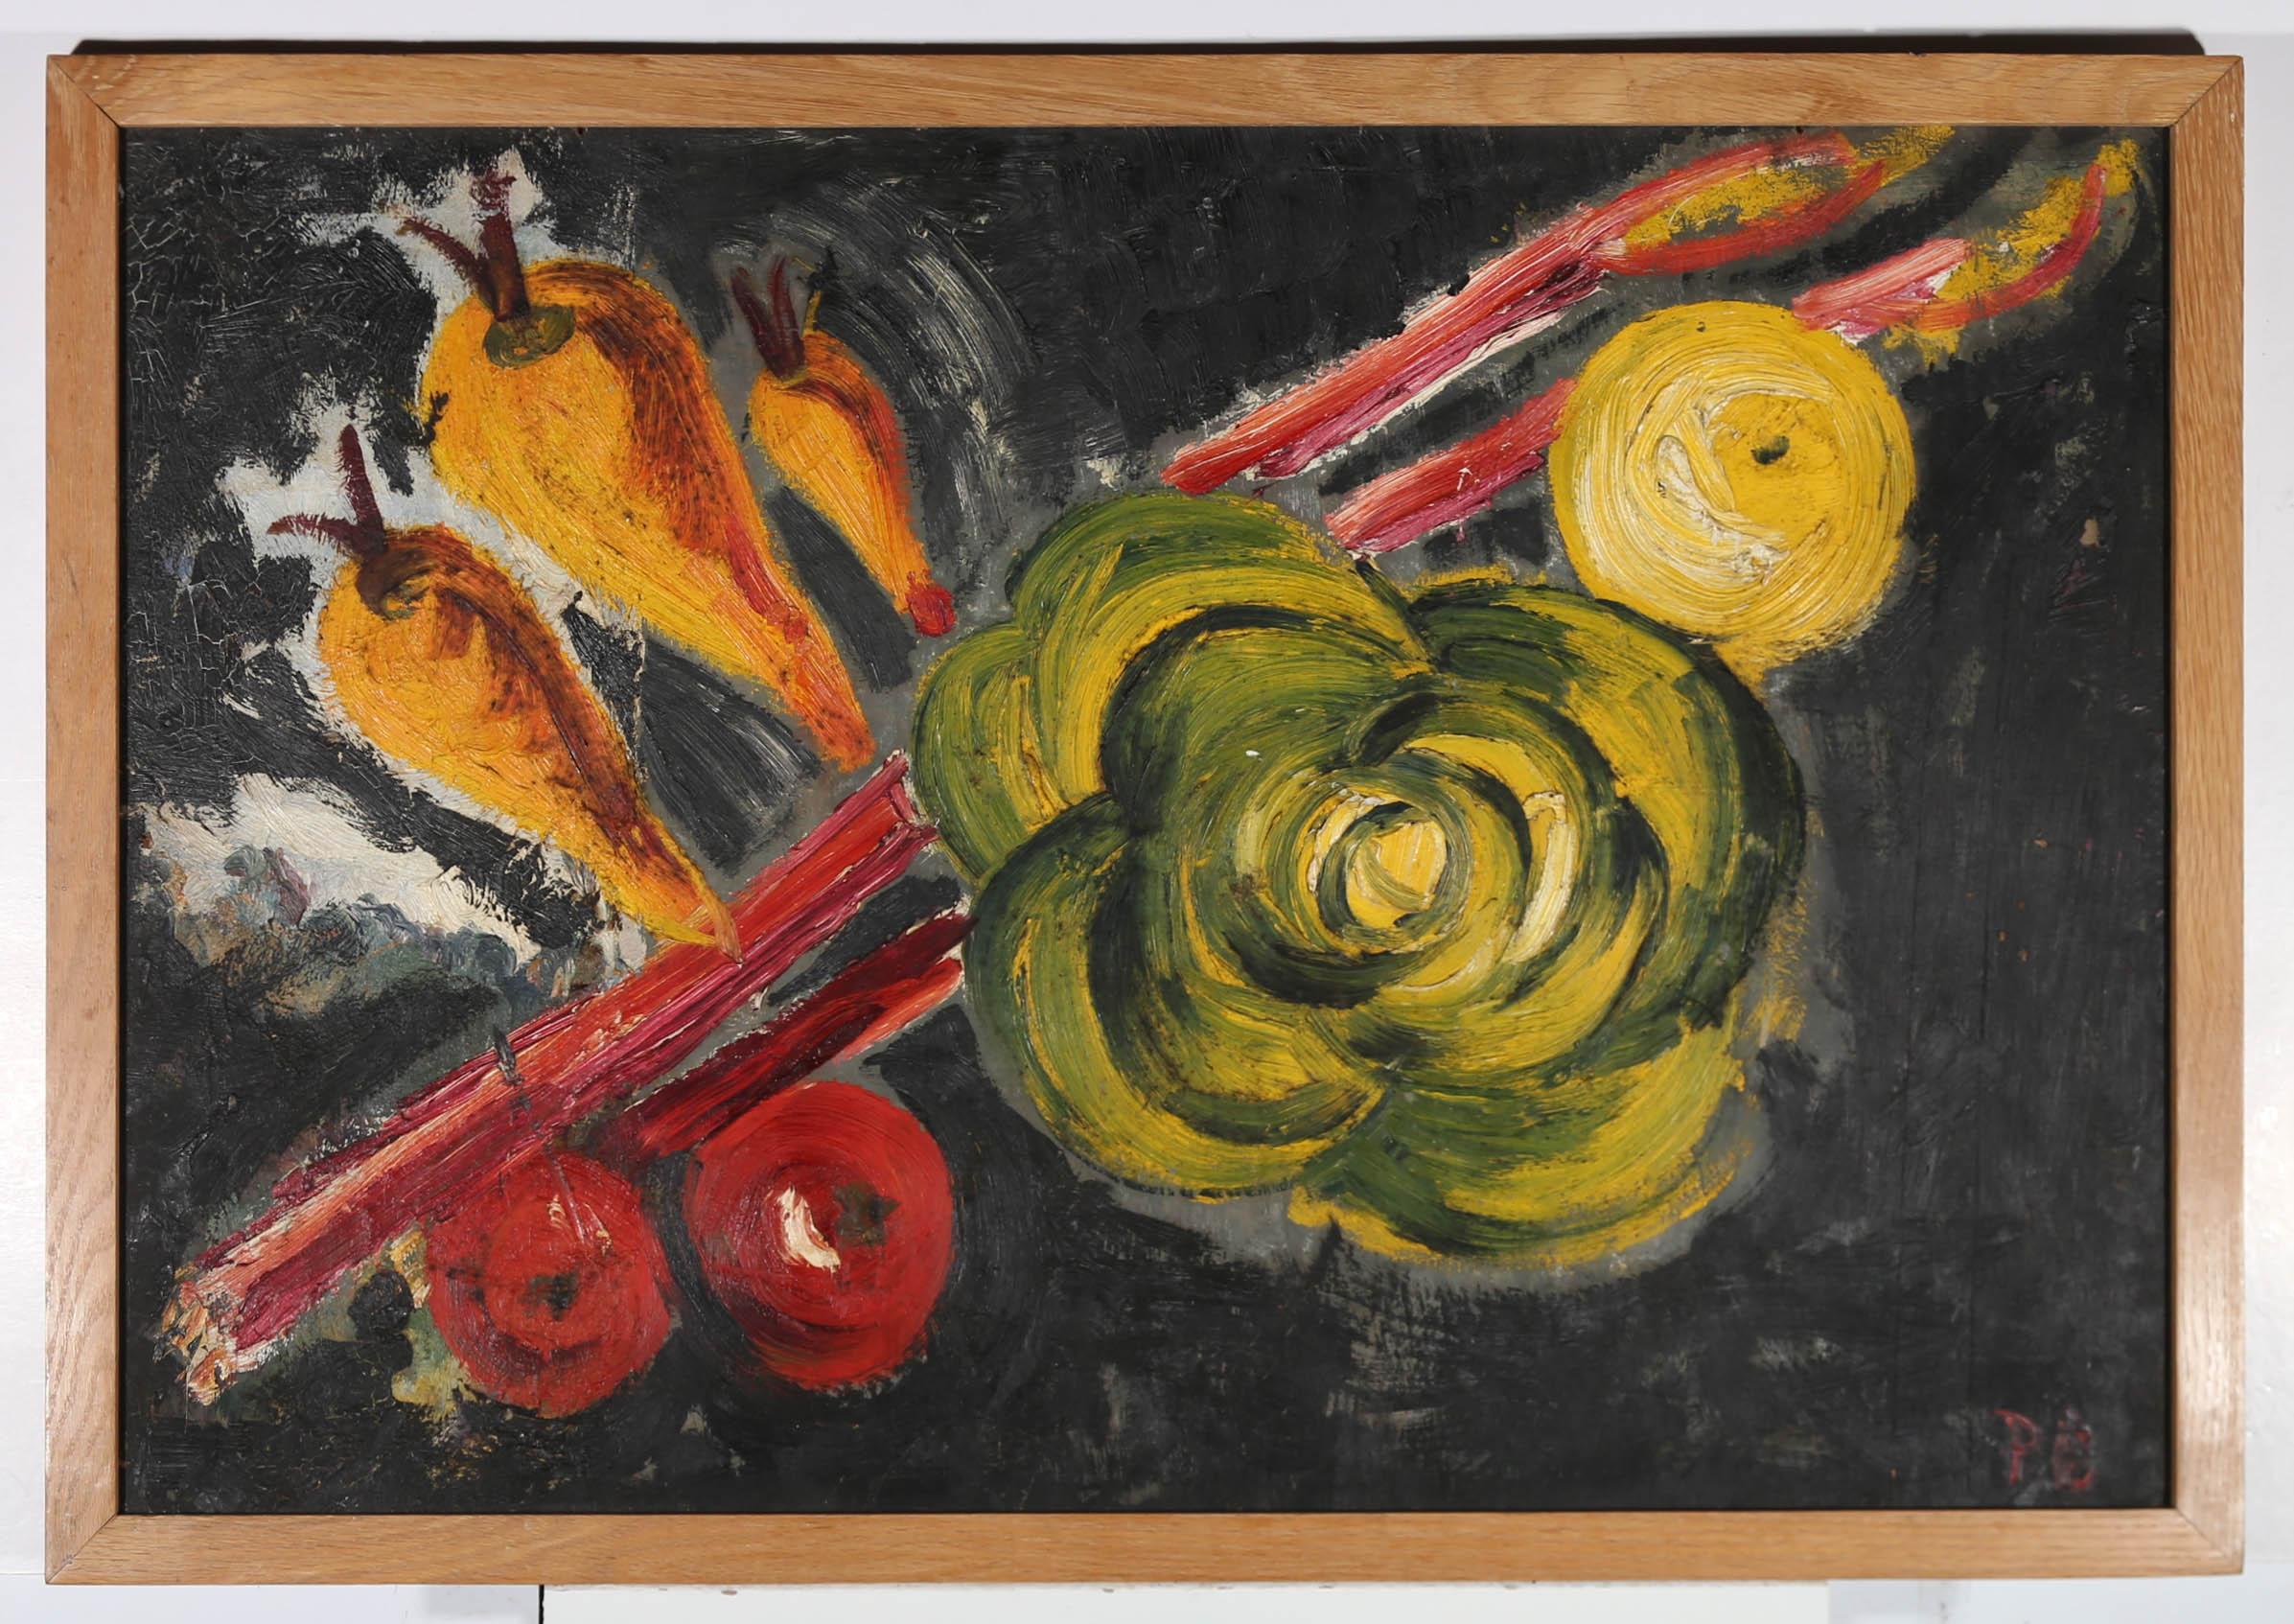 Two charming oil paintings on double-sided board. The first image depicts vibrant abstract vegetables painted expressively onto a dark background. To the reverse the artist has painted a still life study of a vase of flowers in a similar expressive